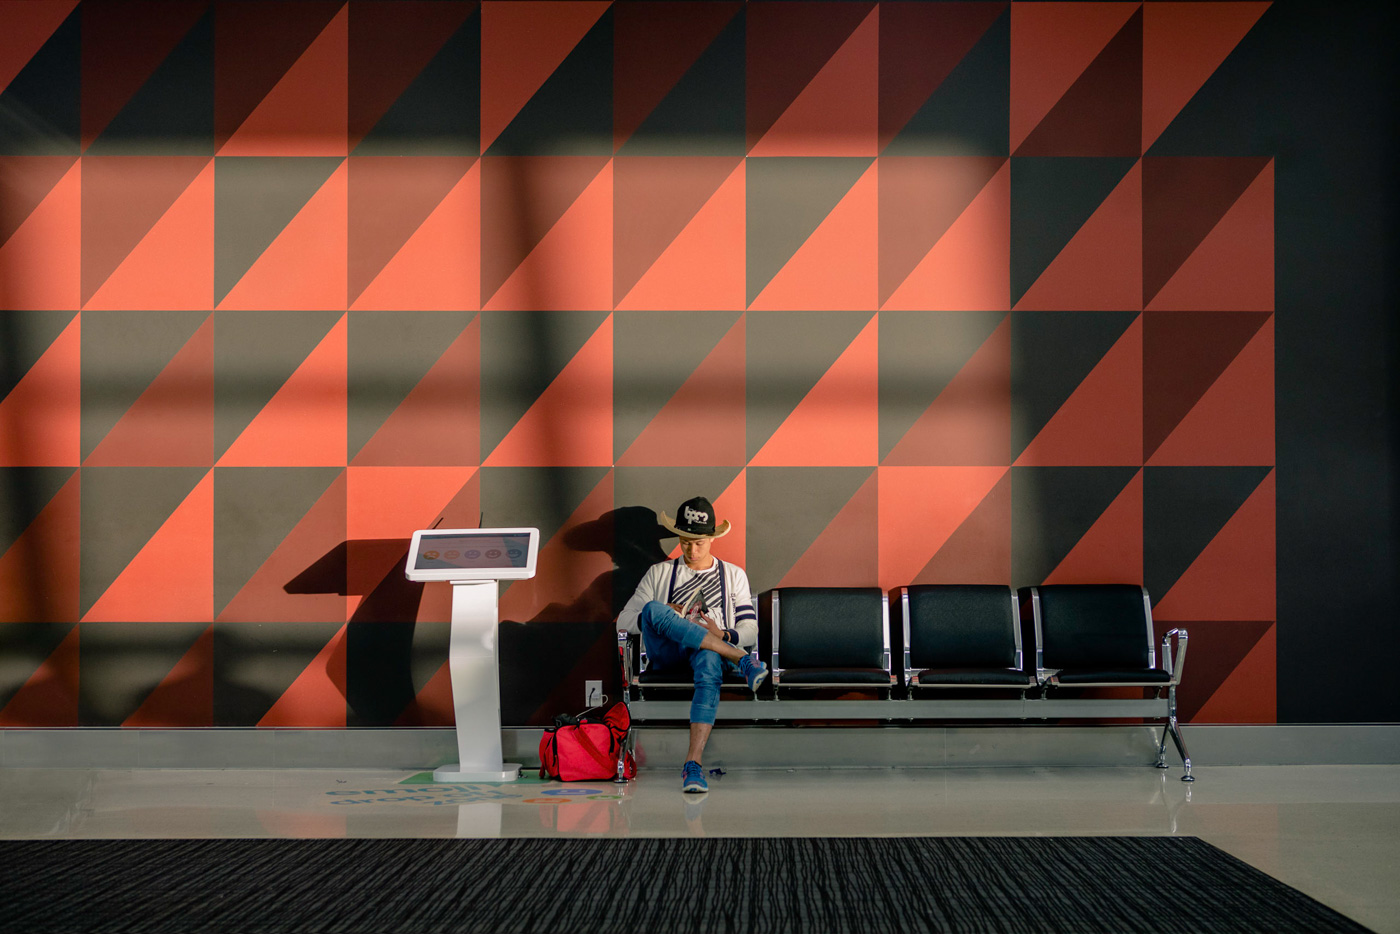 Last Photo of the trip and one of my favorites. Man waits for his plane at Auckland airport